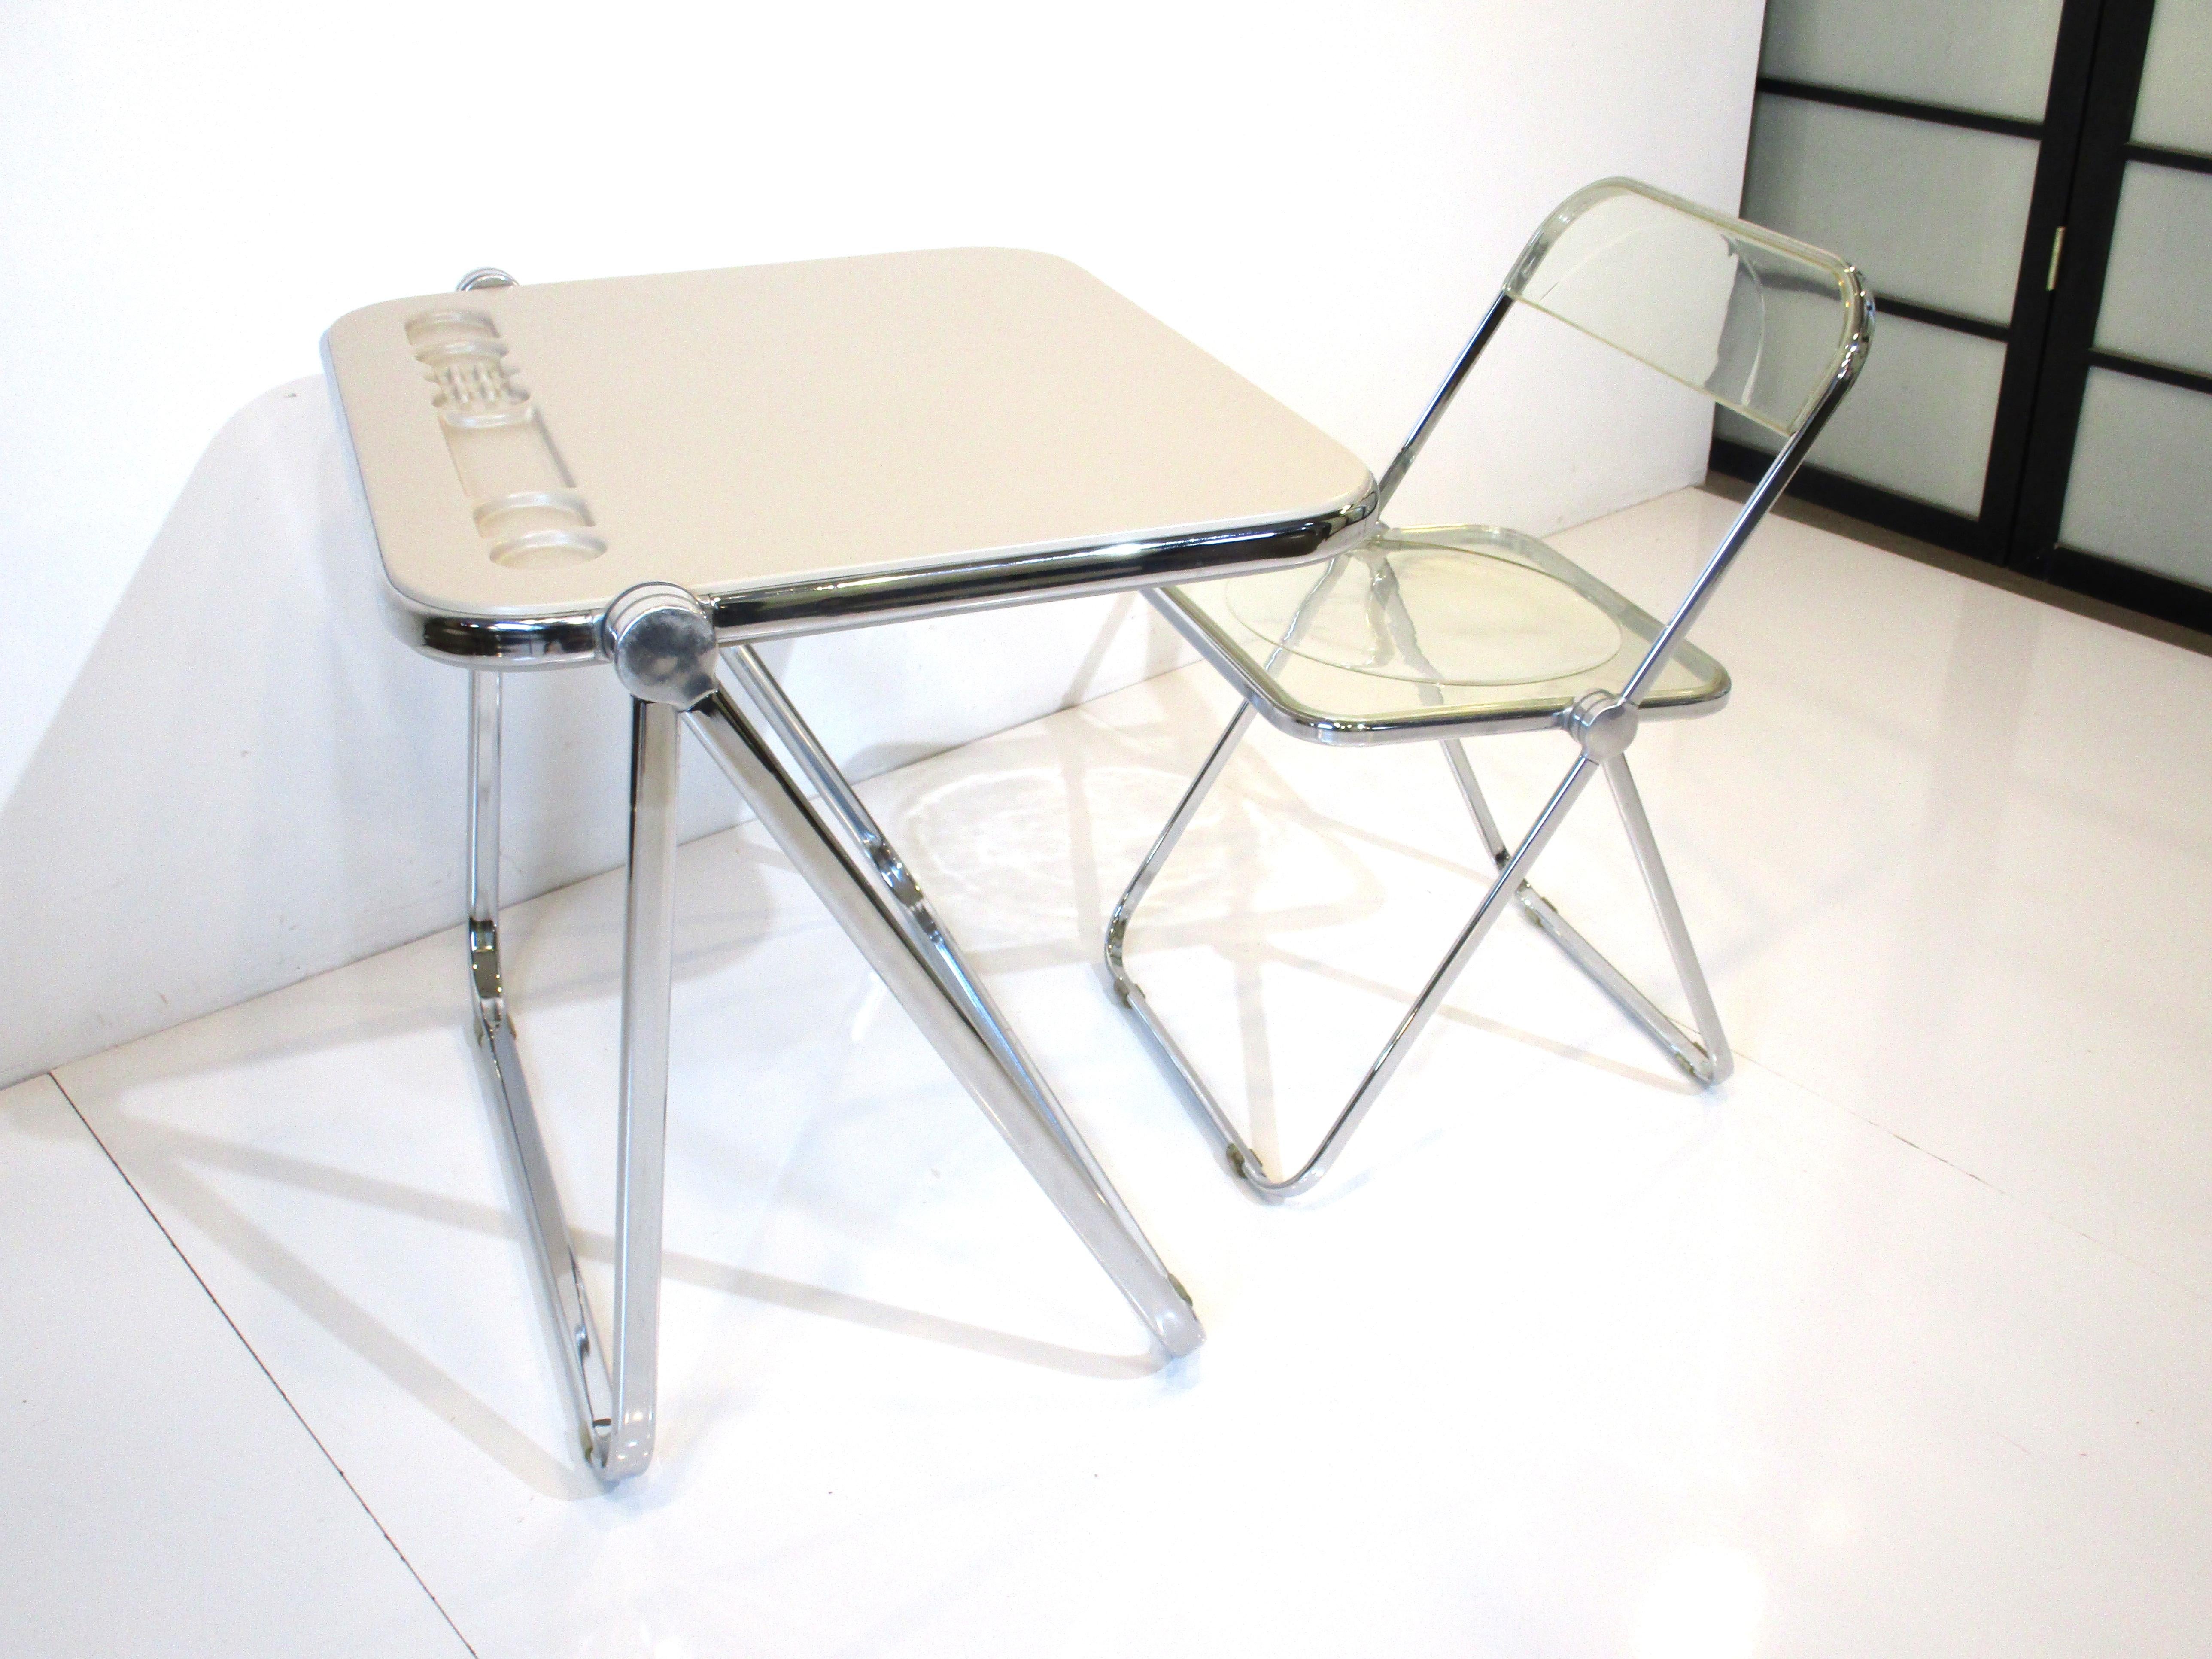 A very smartly designed Platone table and chair set that both fold flat for storage so when you need a desk or not it's perfect for a small space. Constructed in durable ABS plastic and chromed metal and aluminum with great detail designed by